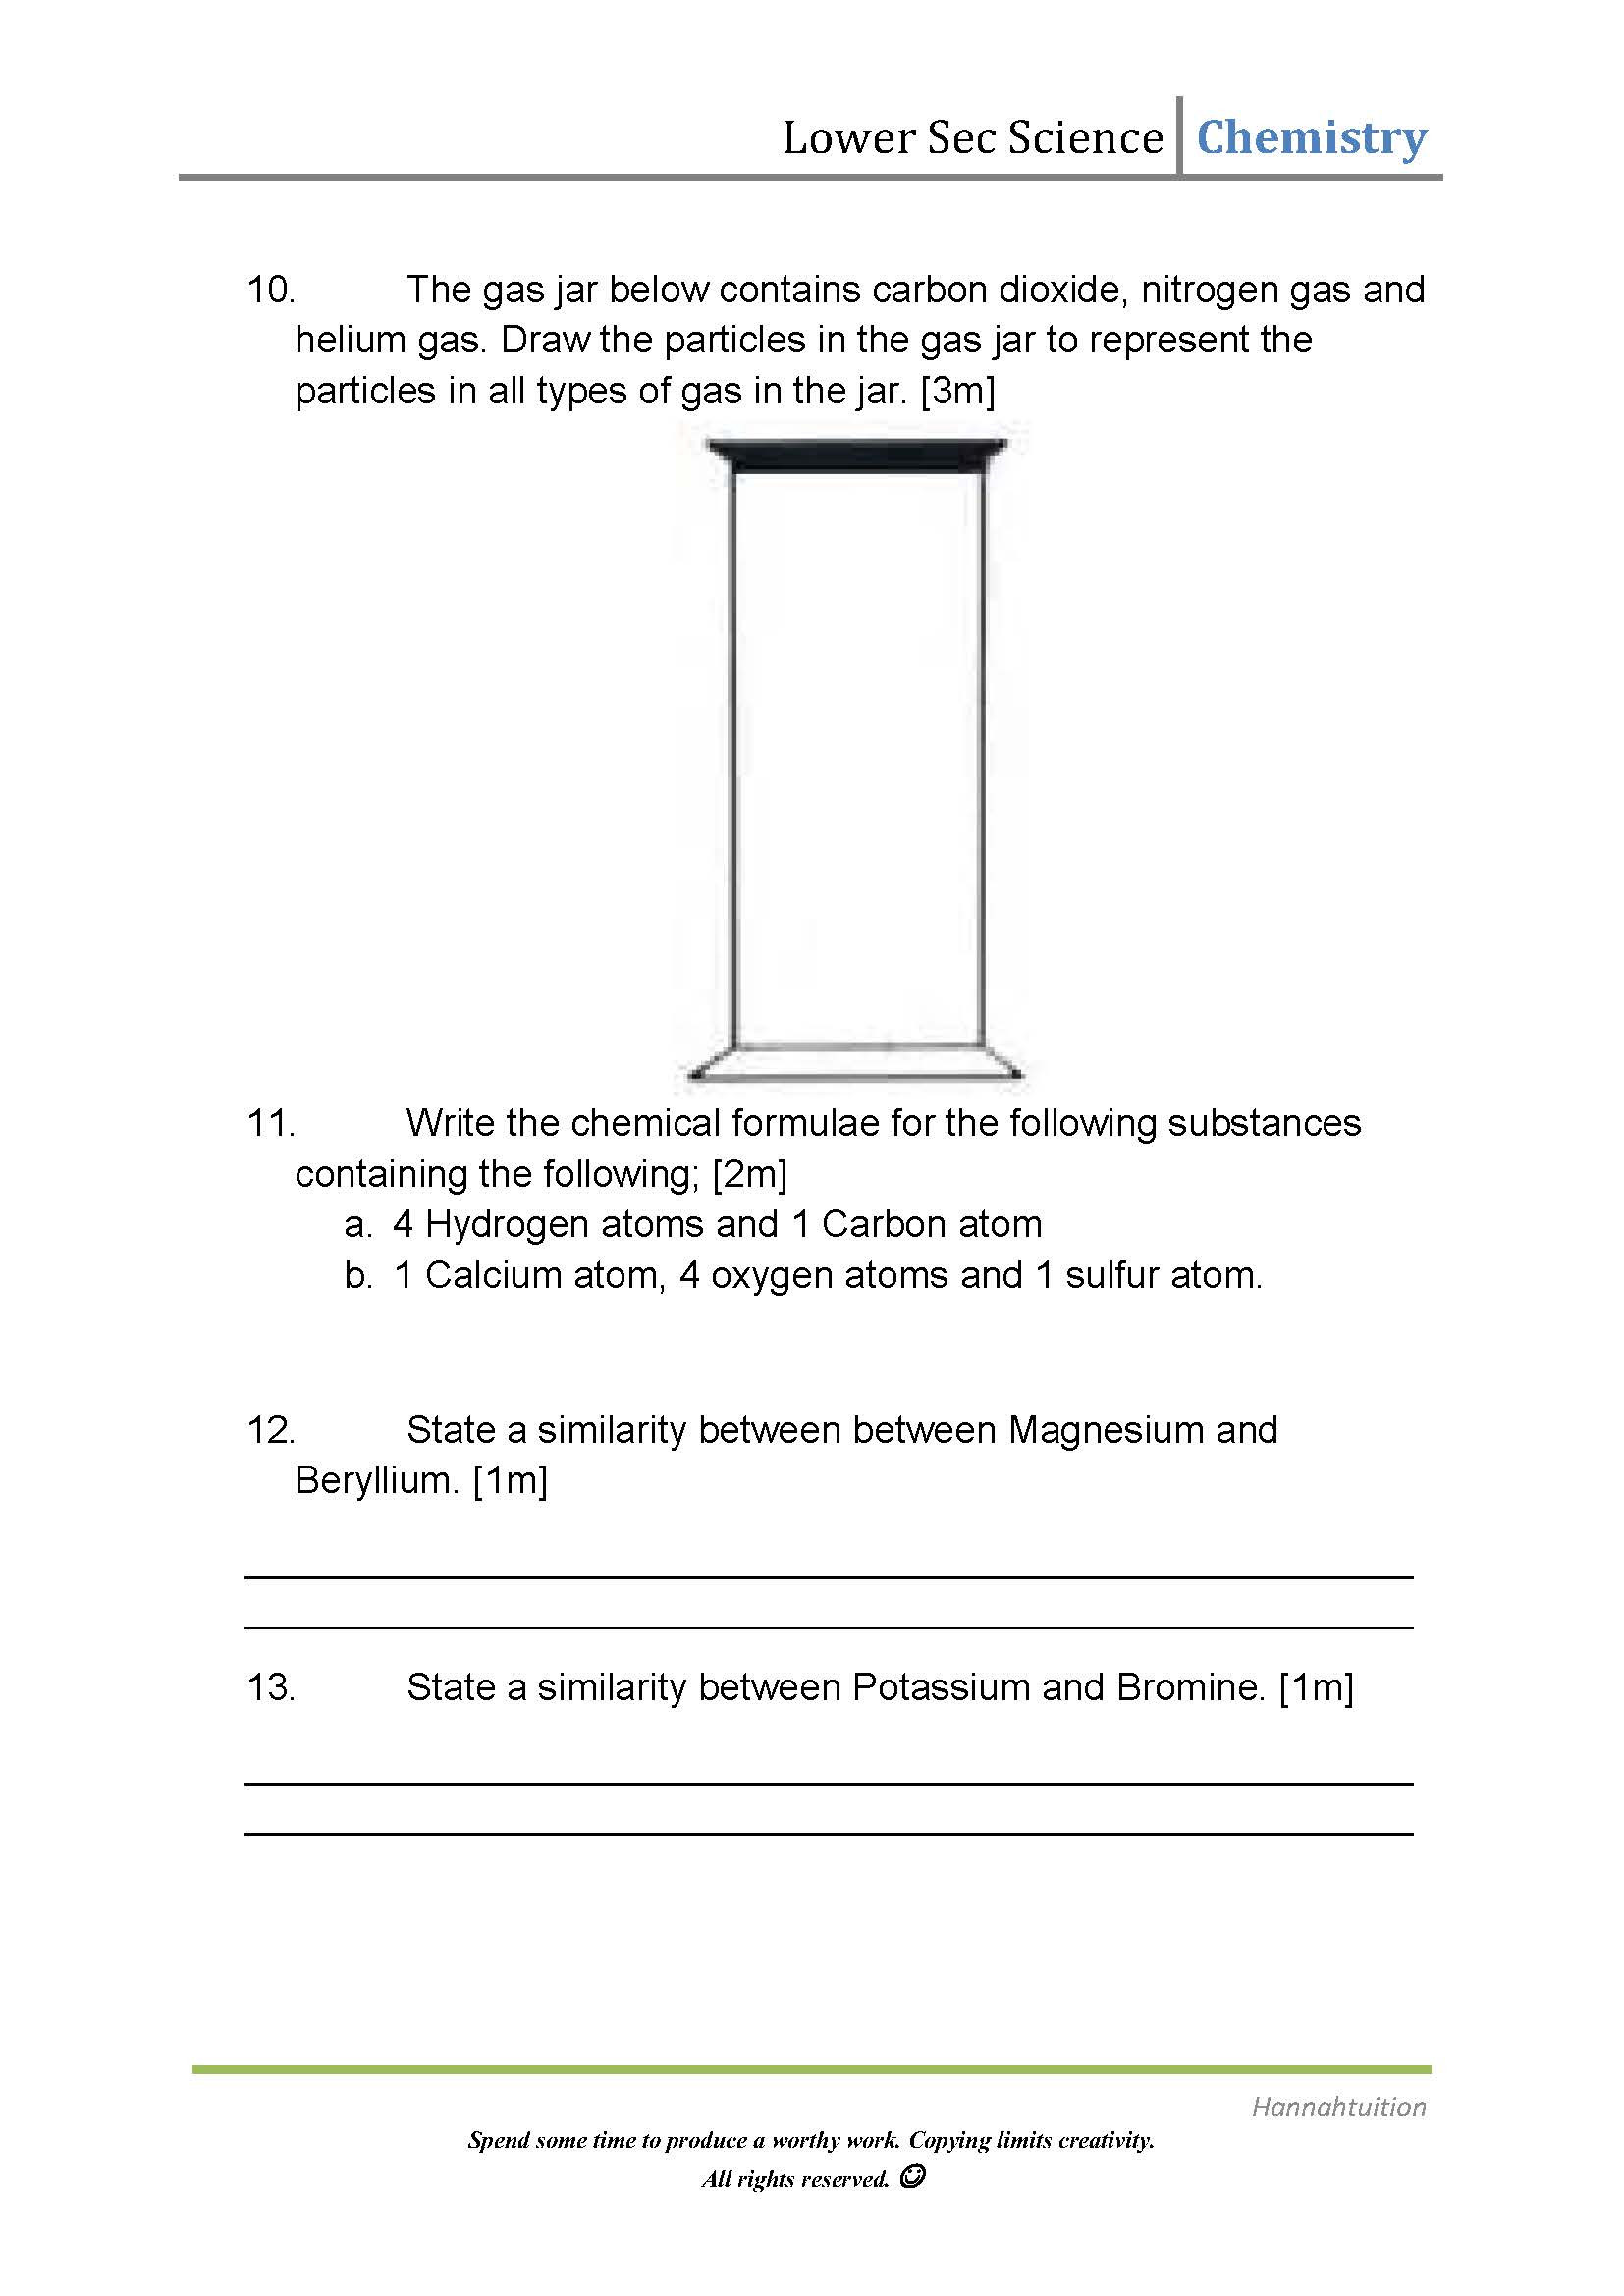 Atoms and Molecules Worksheet Lower Sec atoms Molecules and Ions Quiz – Hannahtuition